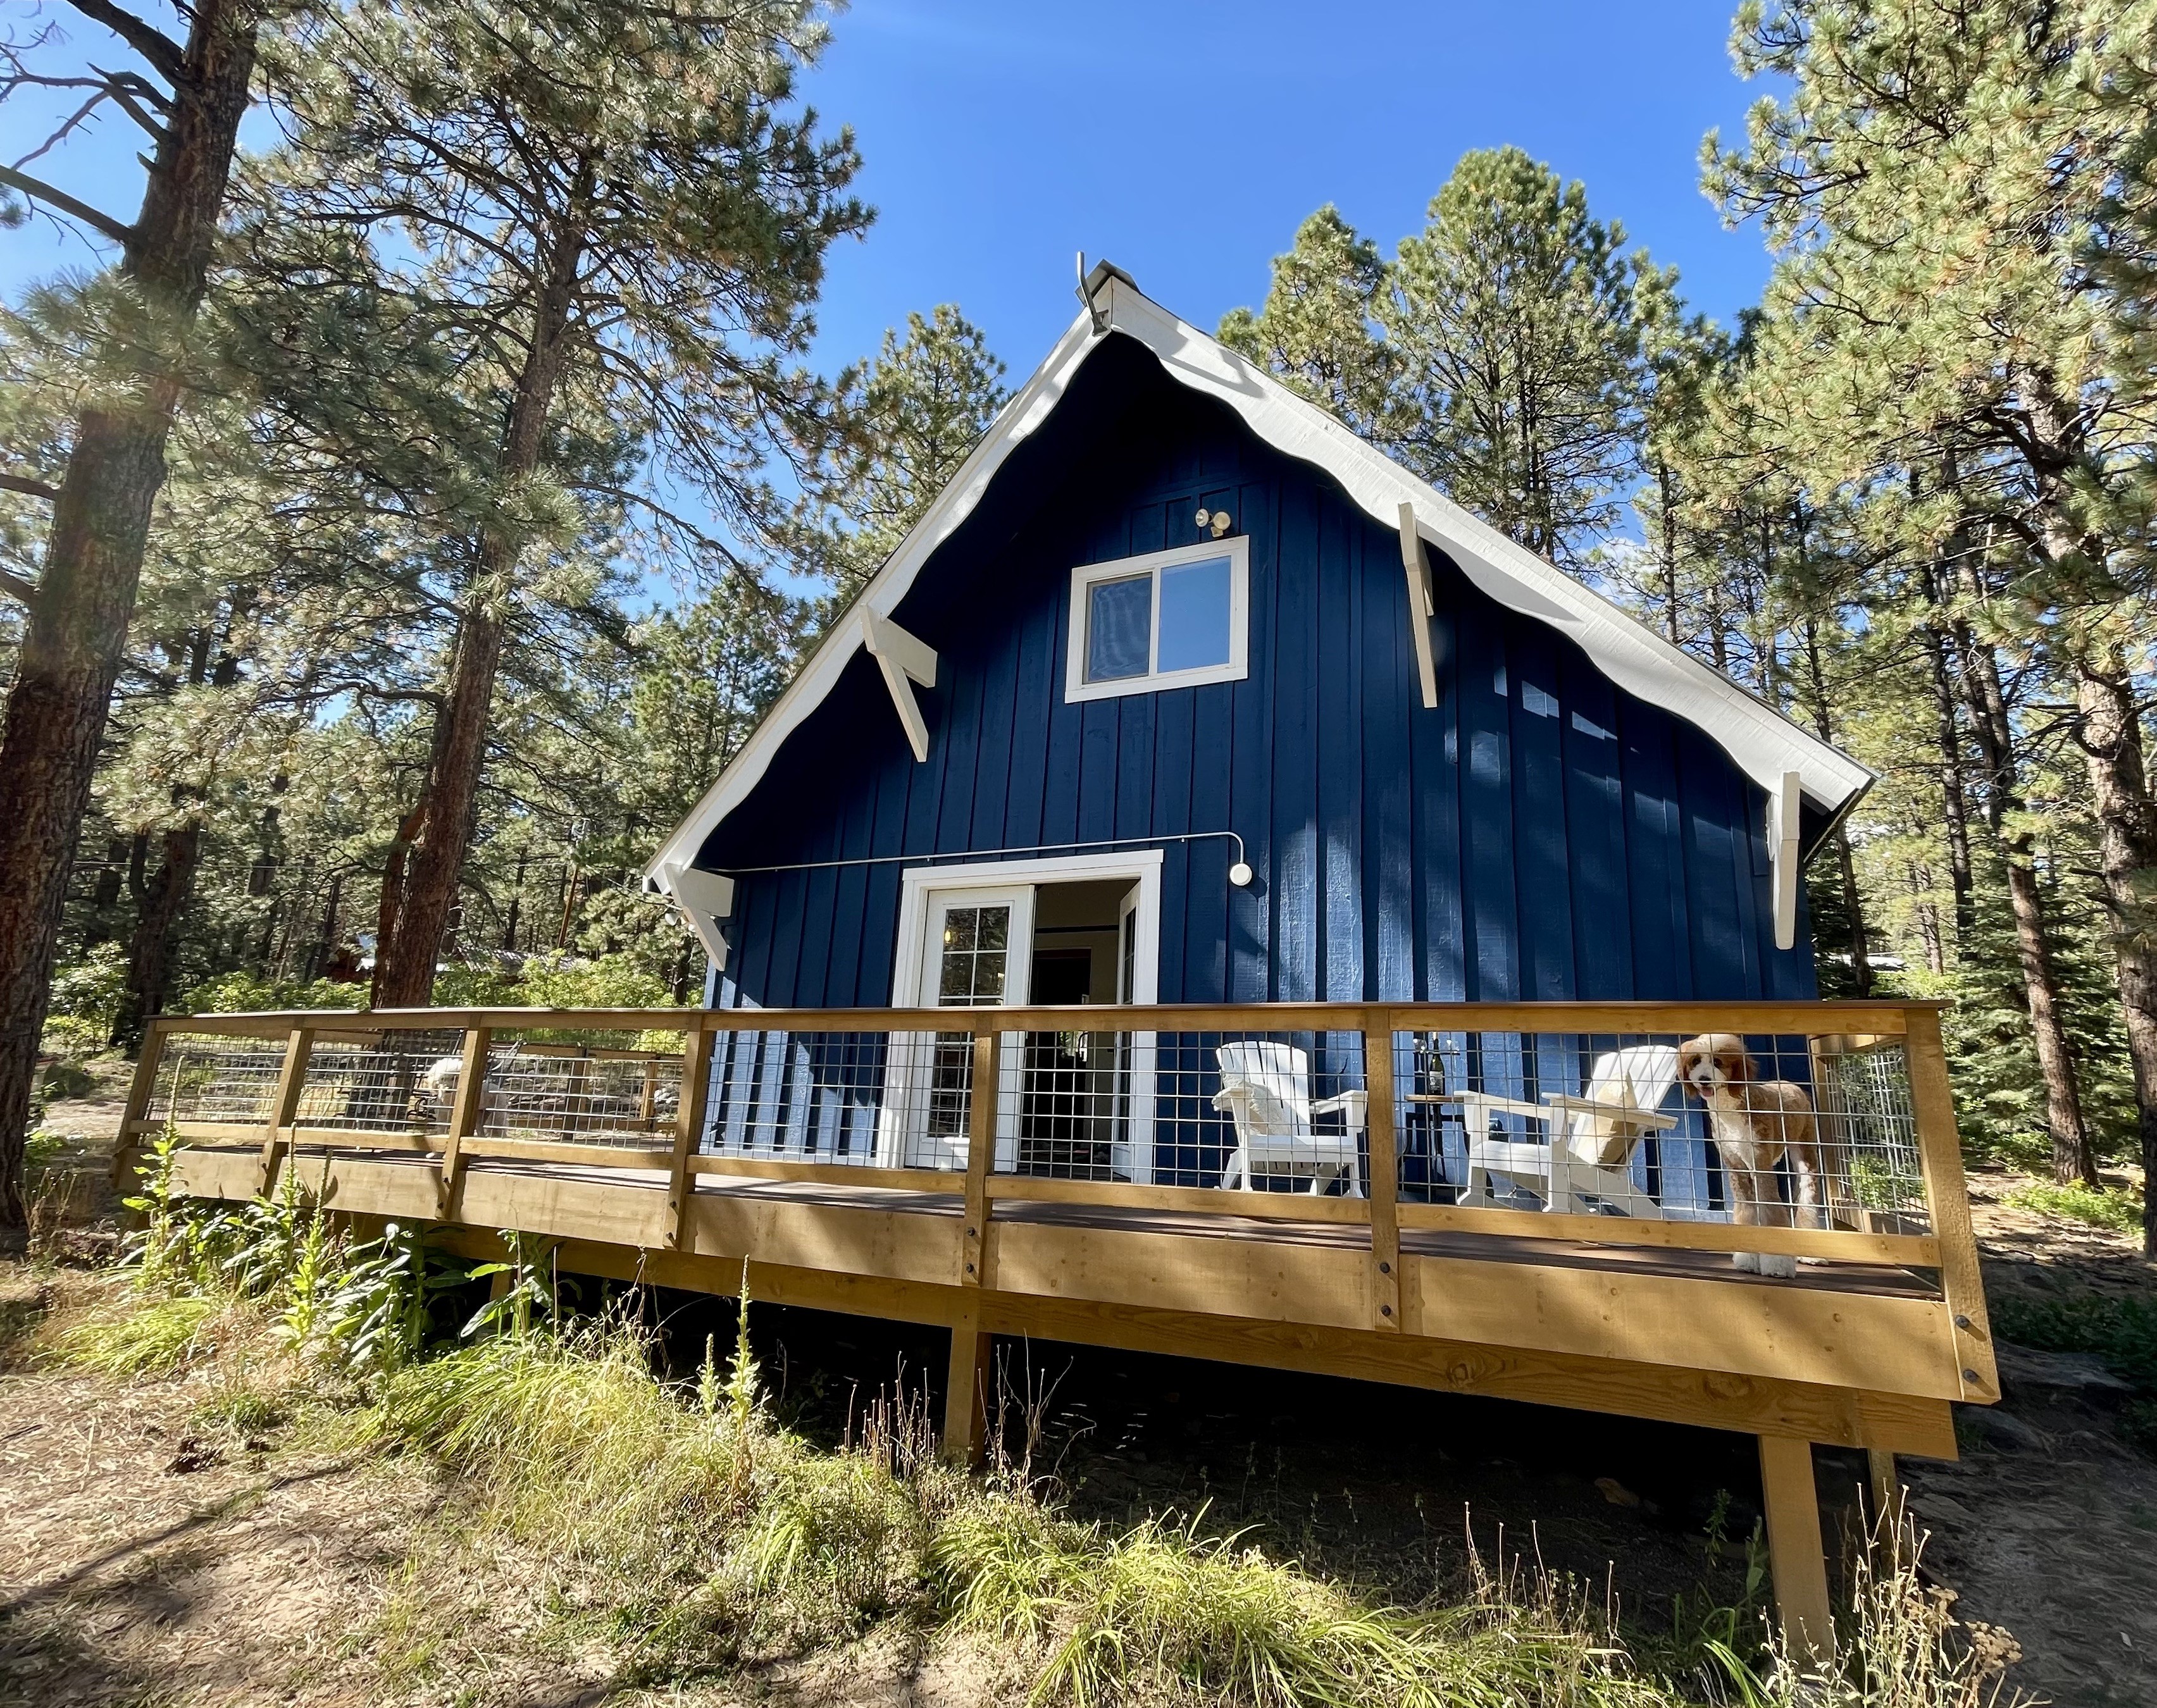 A cobalt blue cabin with white trimming and a front deck with white adirondack chairs nestled amongst pine trees.